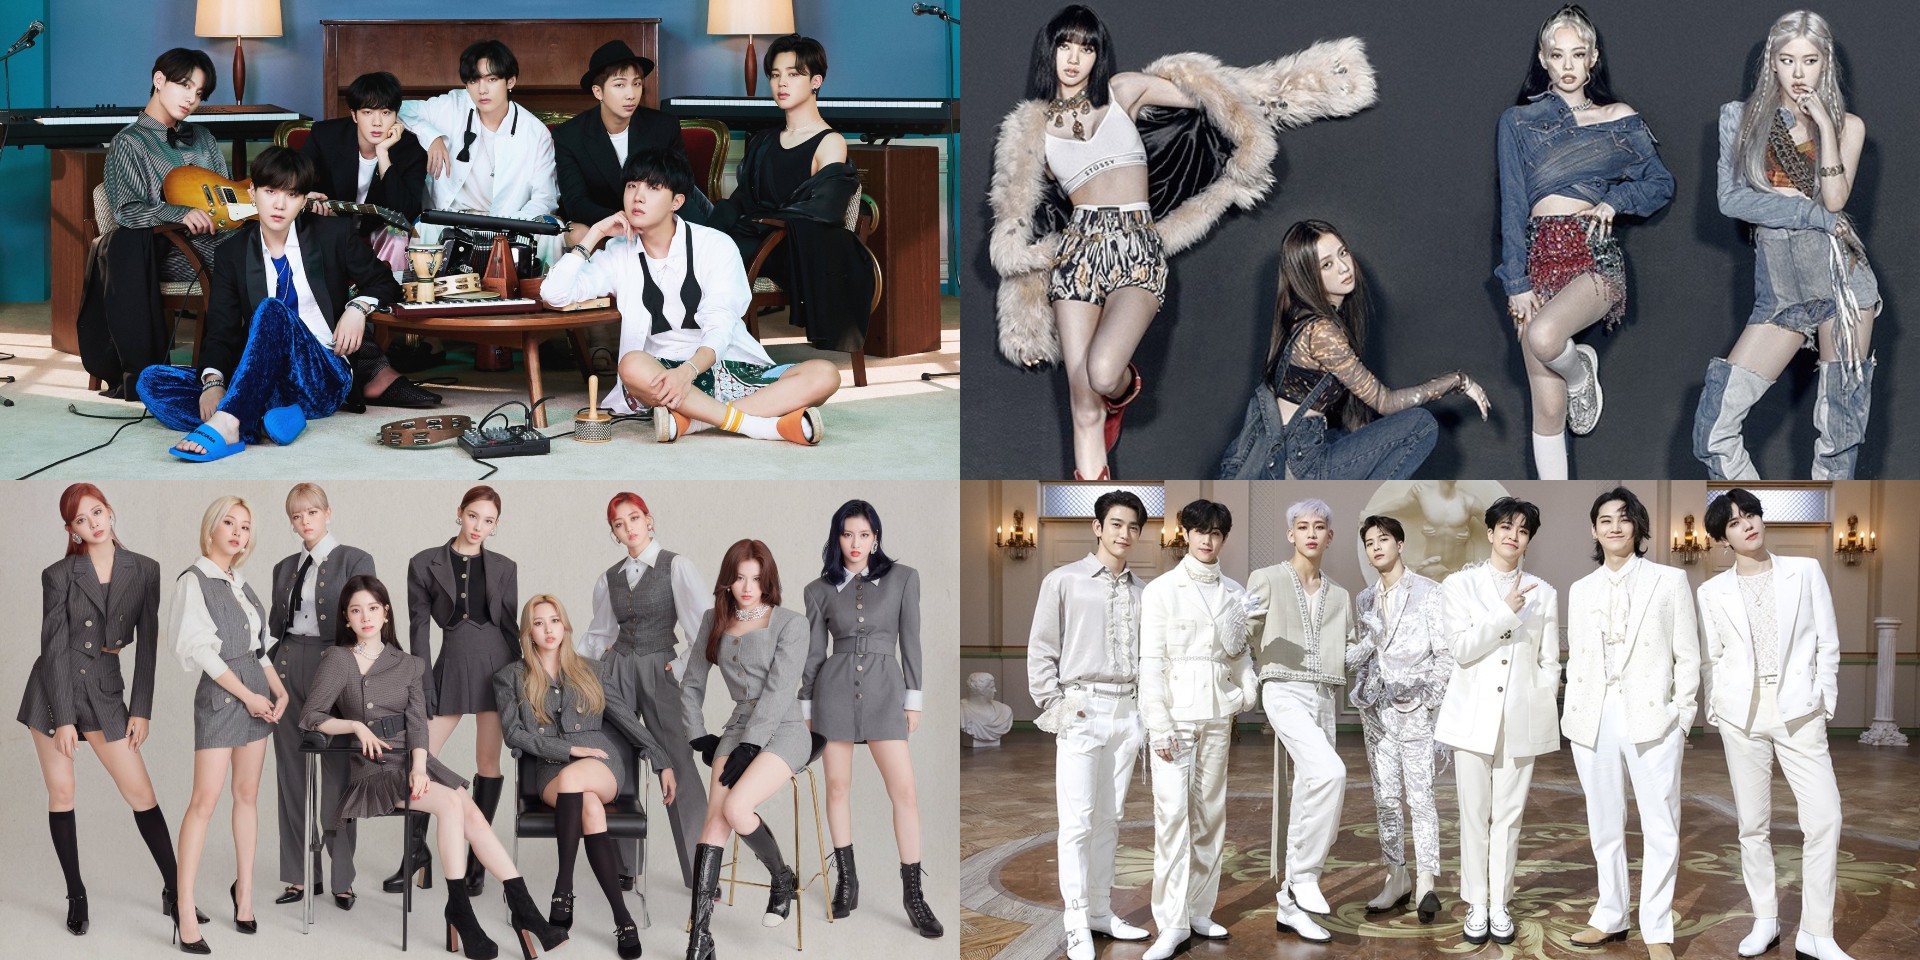 Nominees For Apan Music Awards Revealed Bts Blackpink Twice